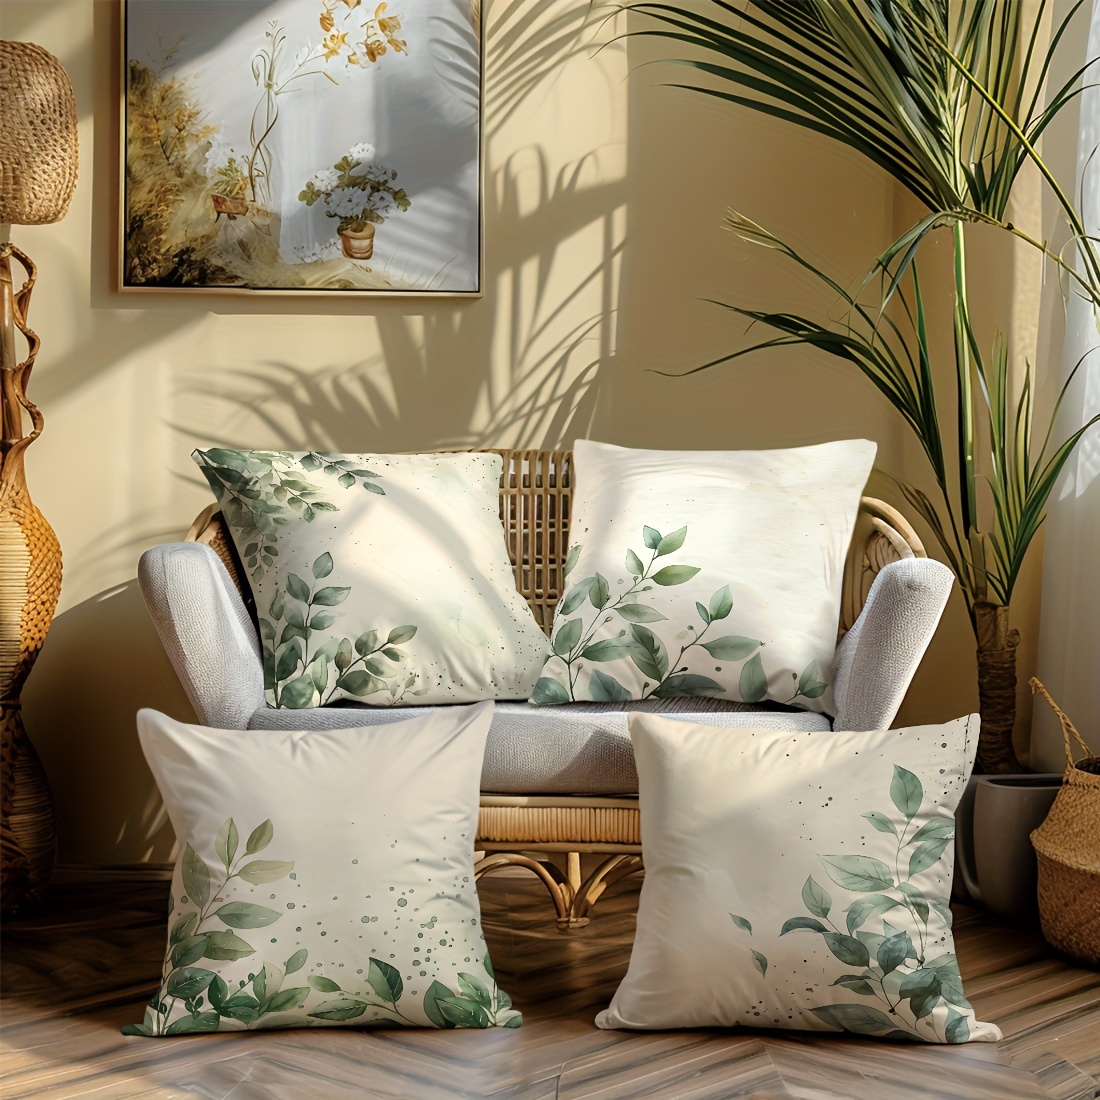 

4-piece Set Modern Green Leaf Print Throw Pillow Covers - Zippered, Machine Washable Polyester Cushion Cases For Sofa, Bed, Car & Living Room Decor Pillows For Couch Couch Pillows